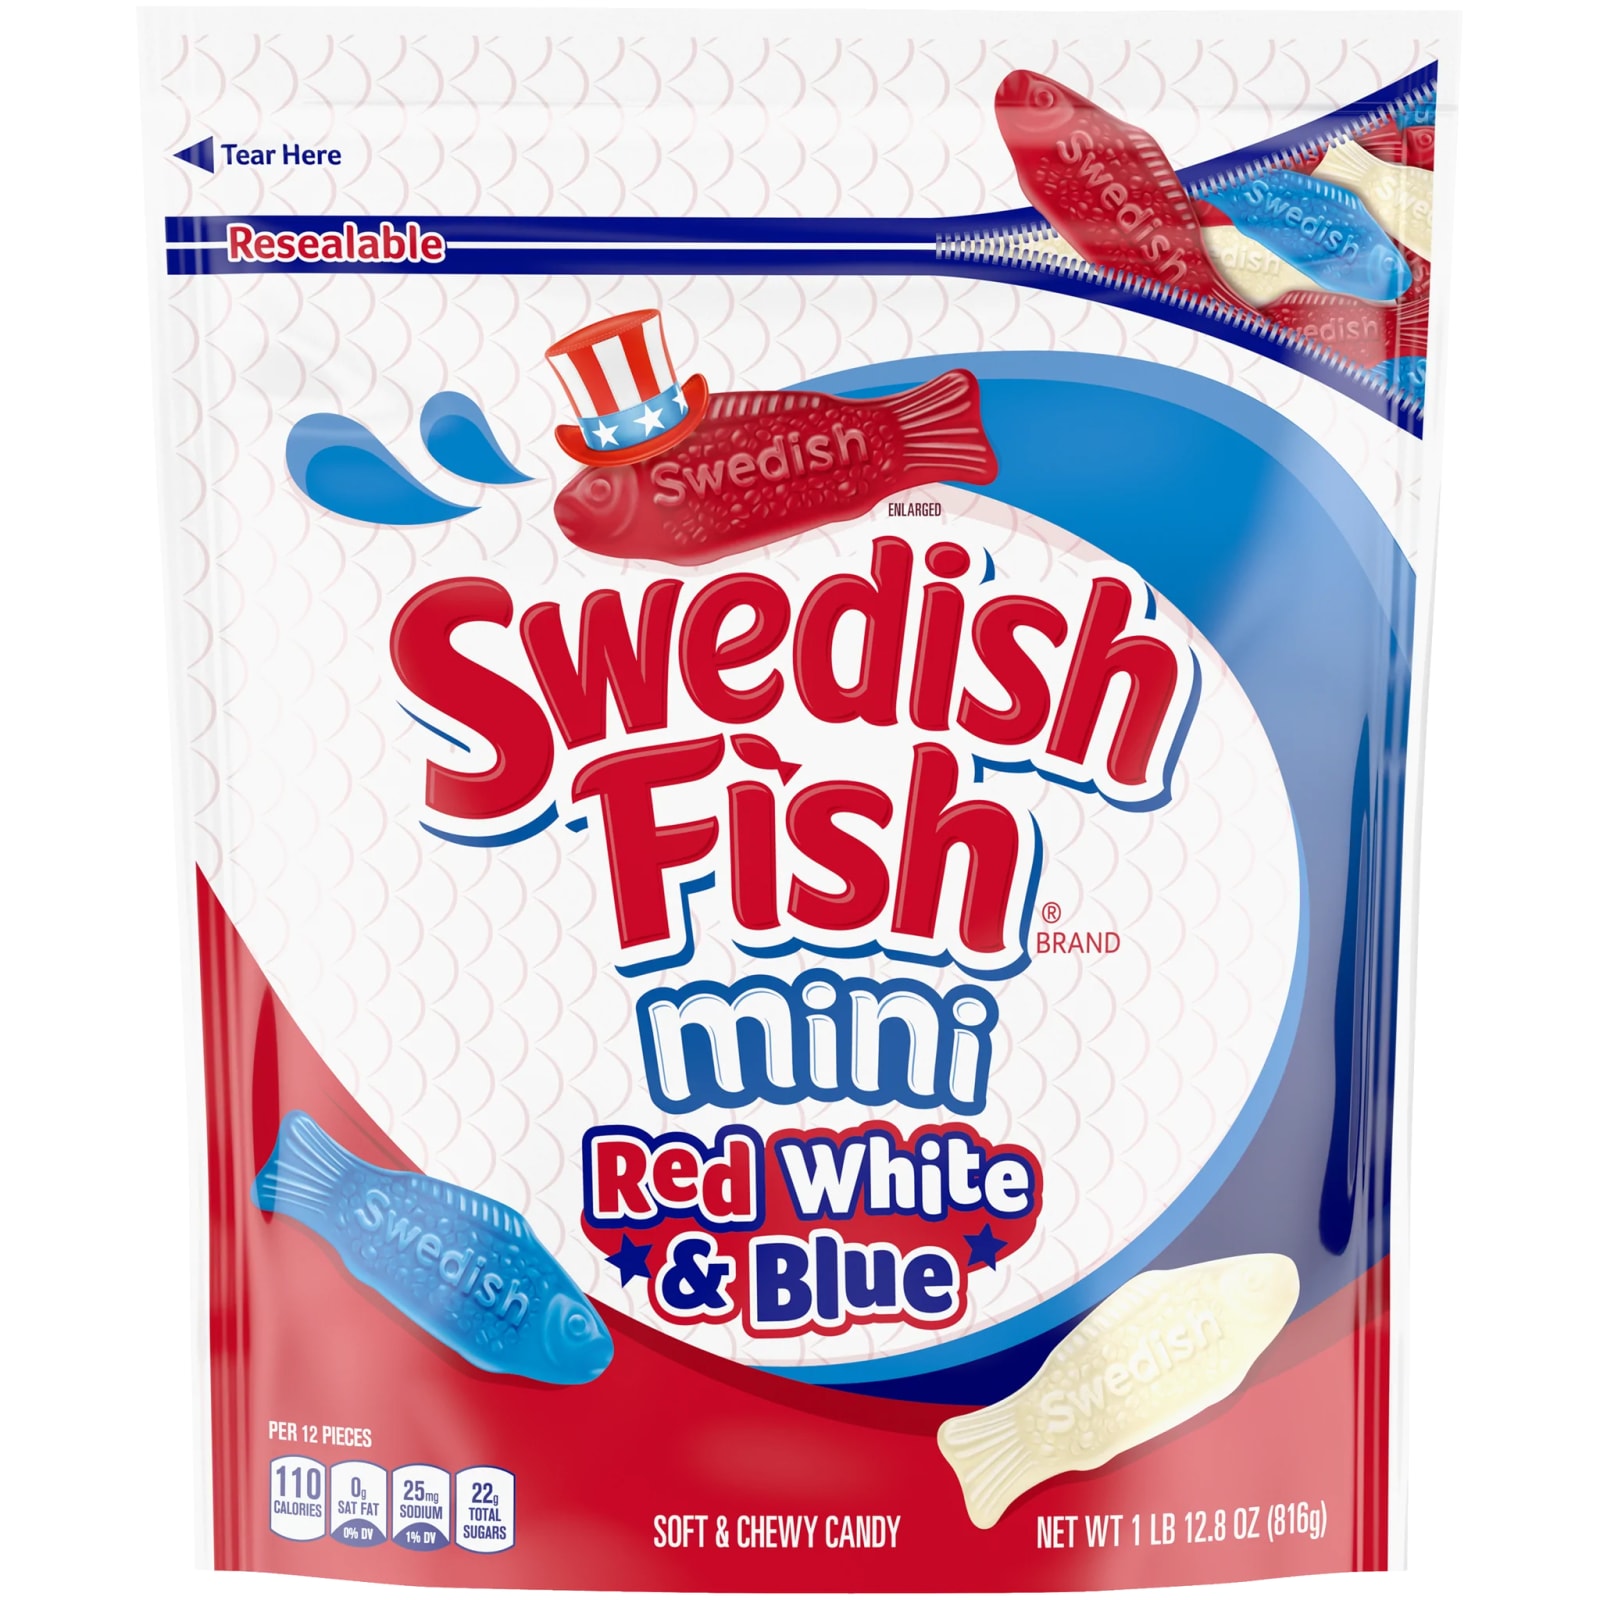 12.8 oz Mini Red White & Blue Soft Chewy Candy by Swedish Fish at Fleet Farm